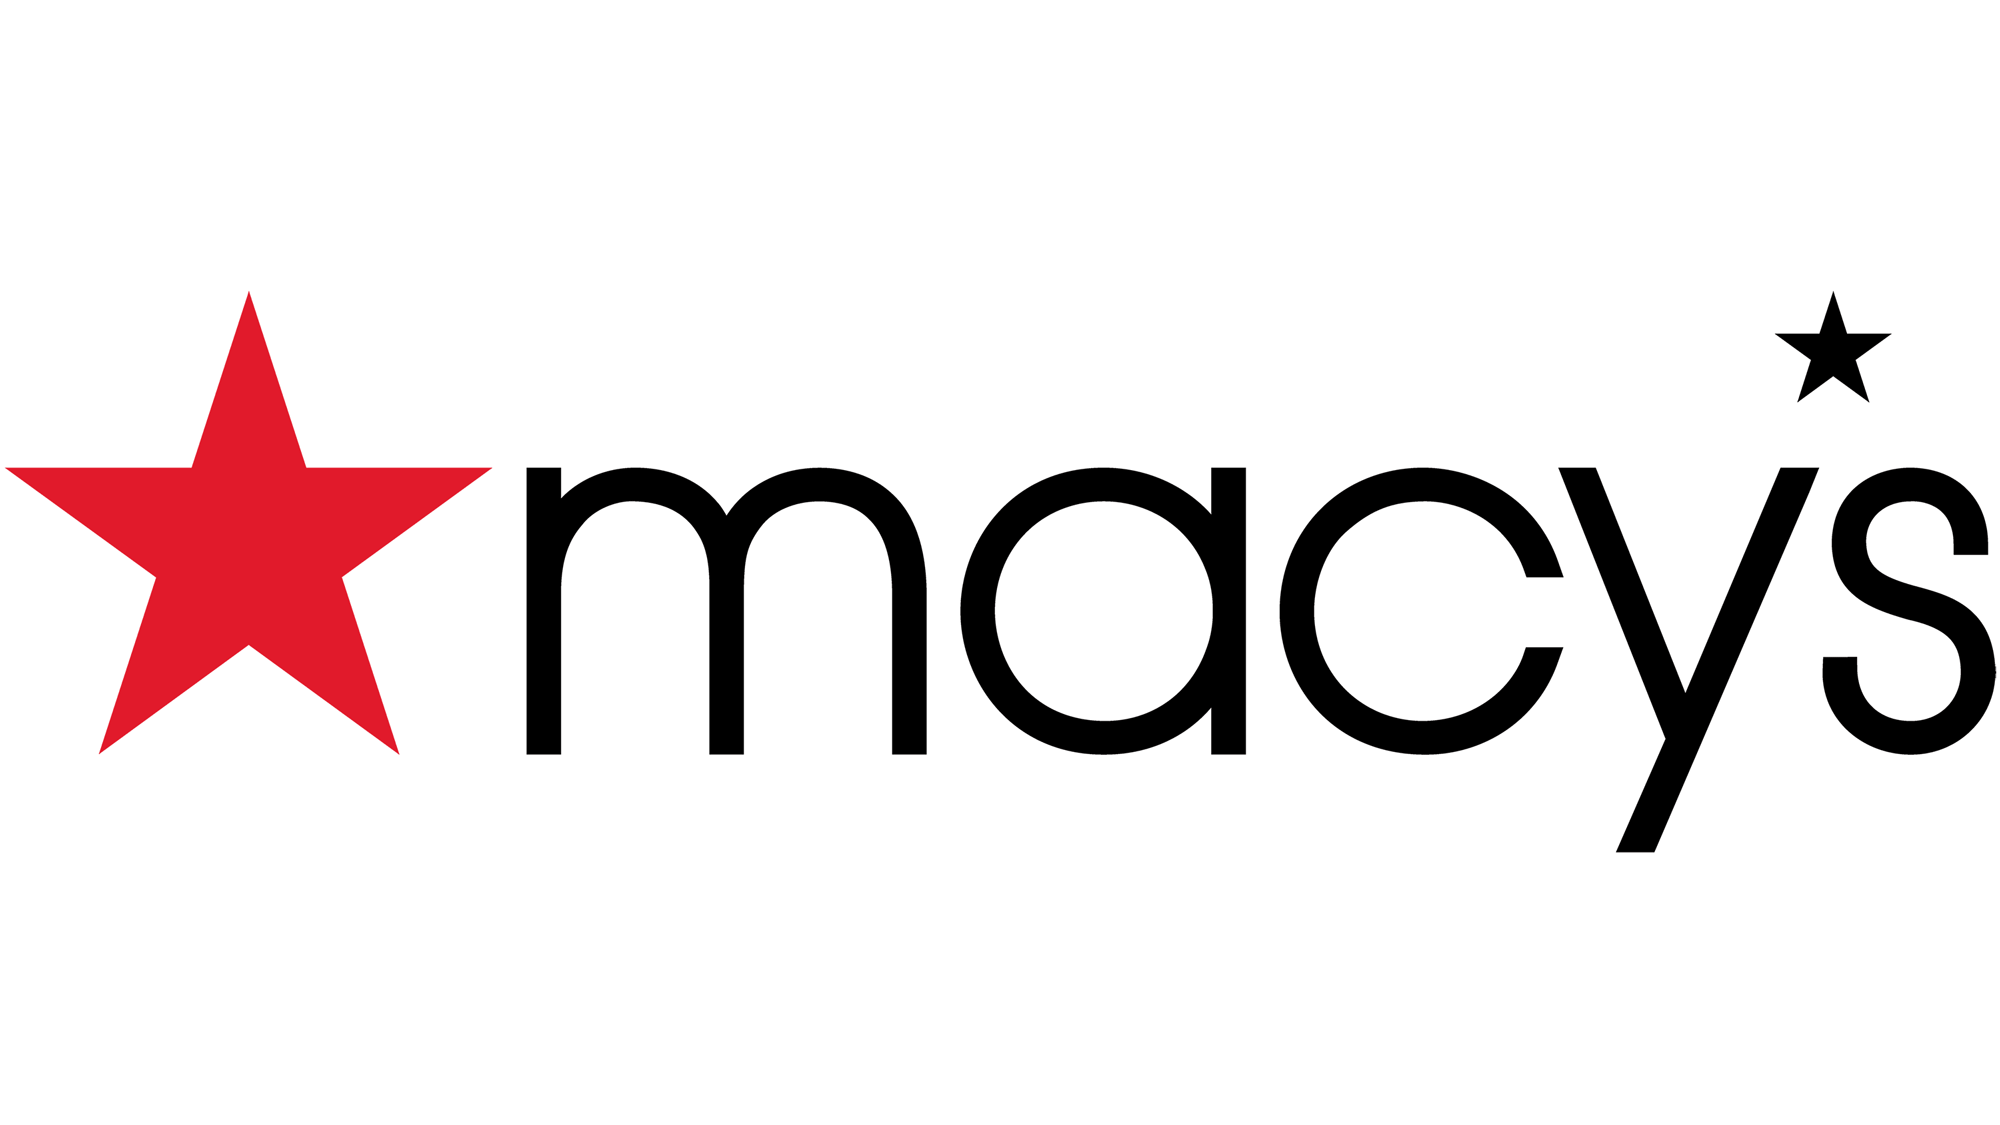 Get Your Macy's Order with Same-Day Delivery from Getcho